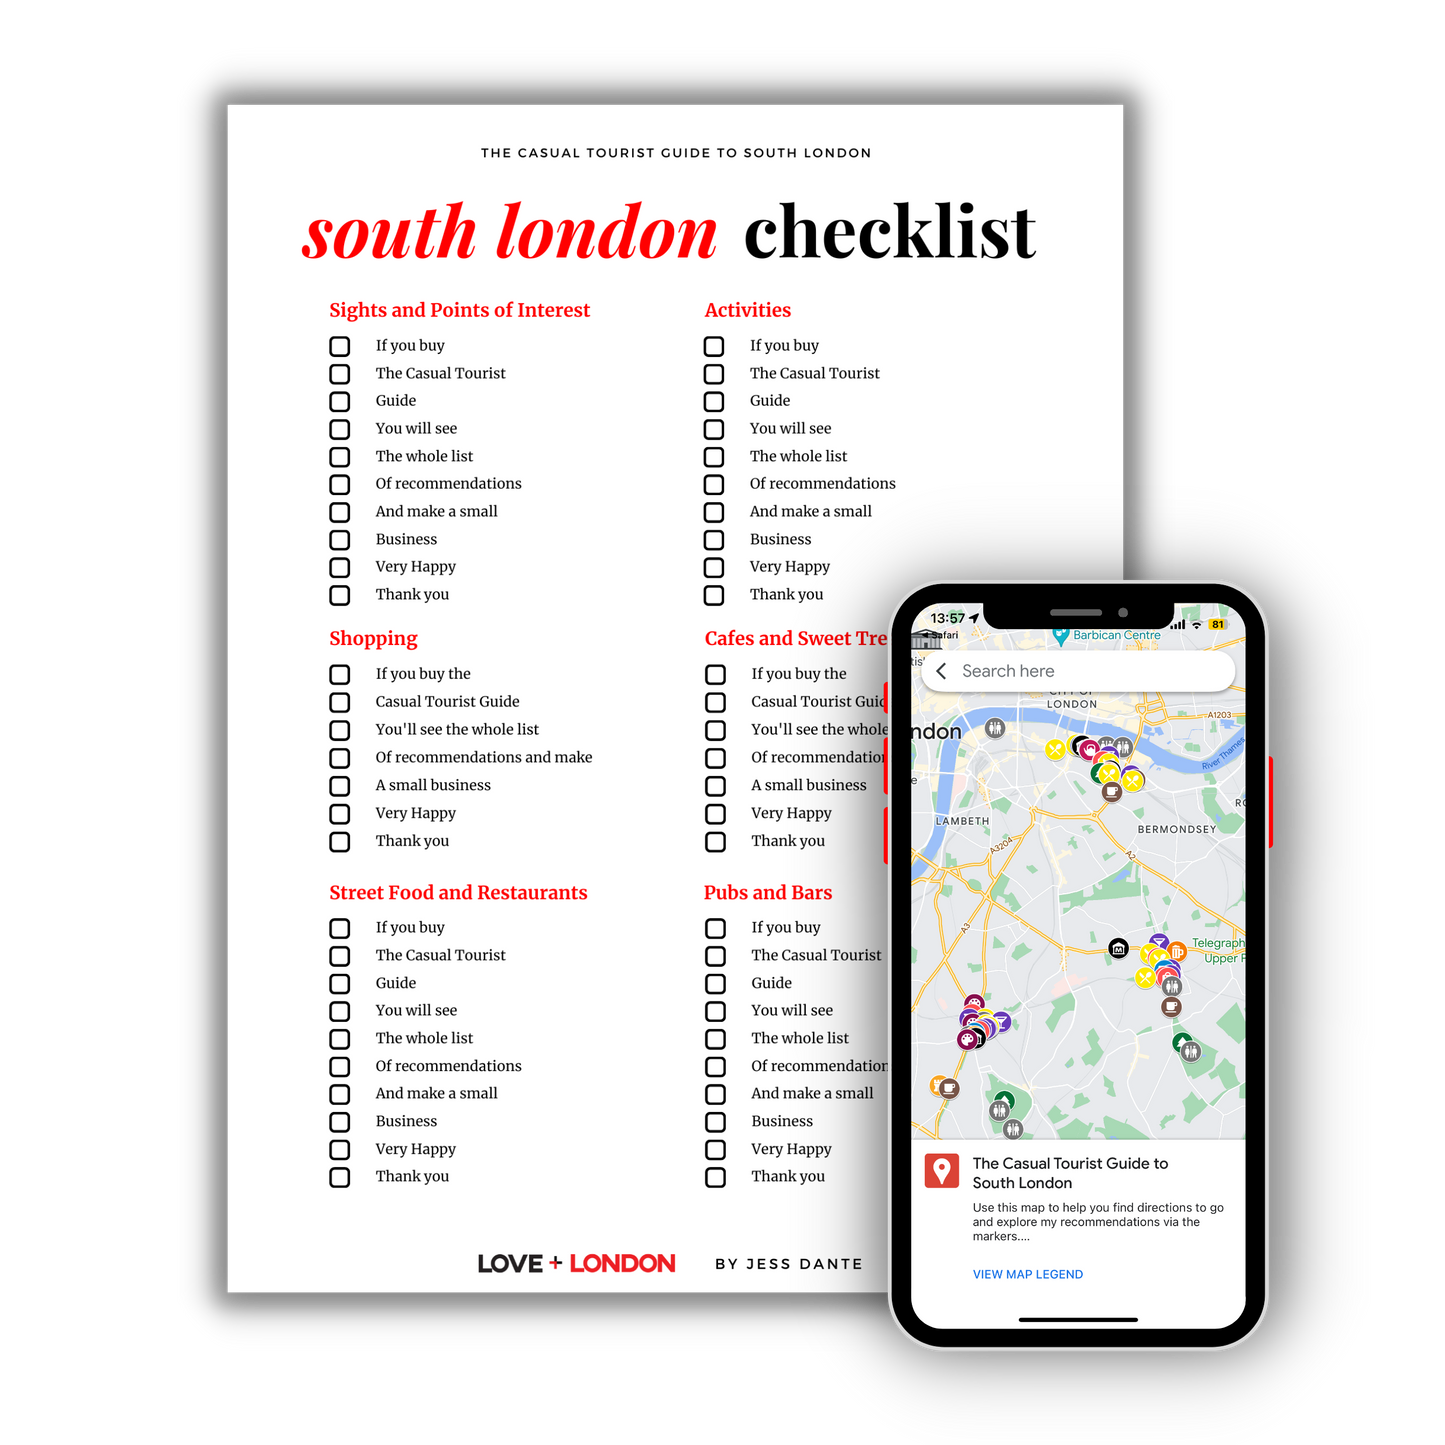 The Casual Tourist Guide to South London